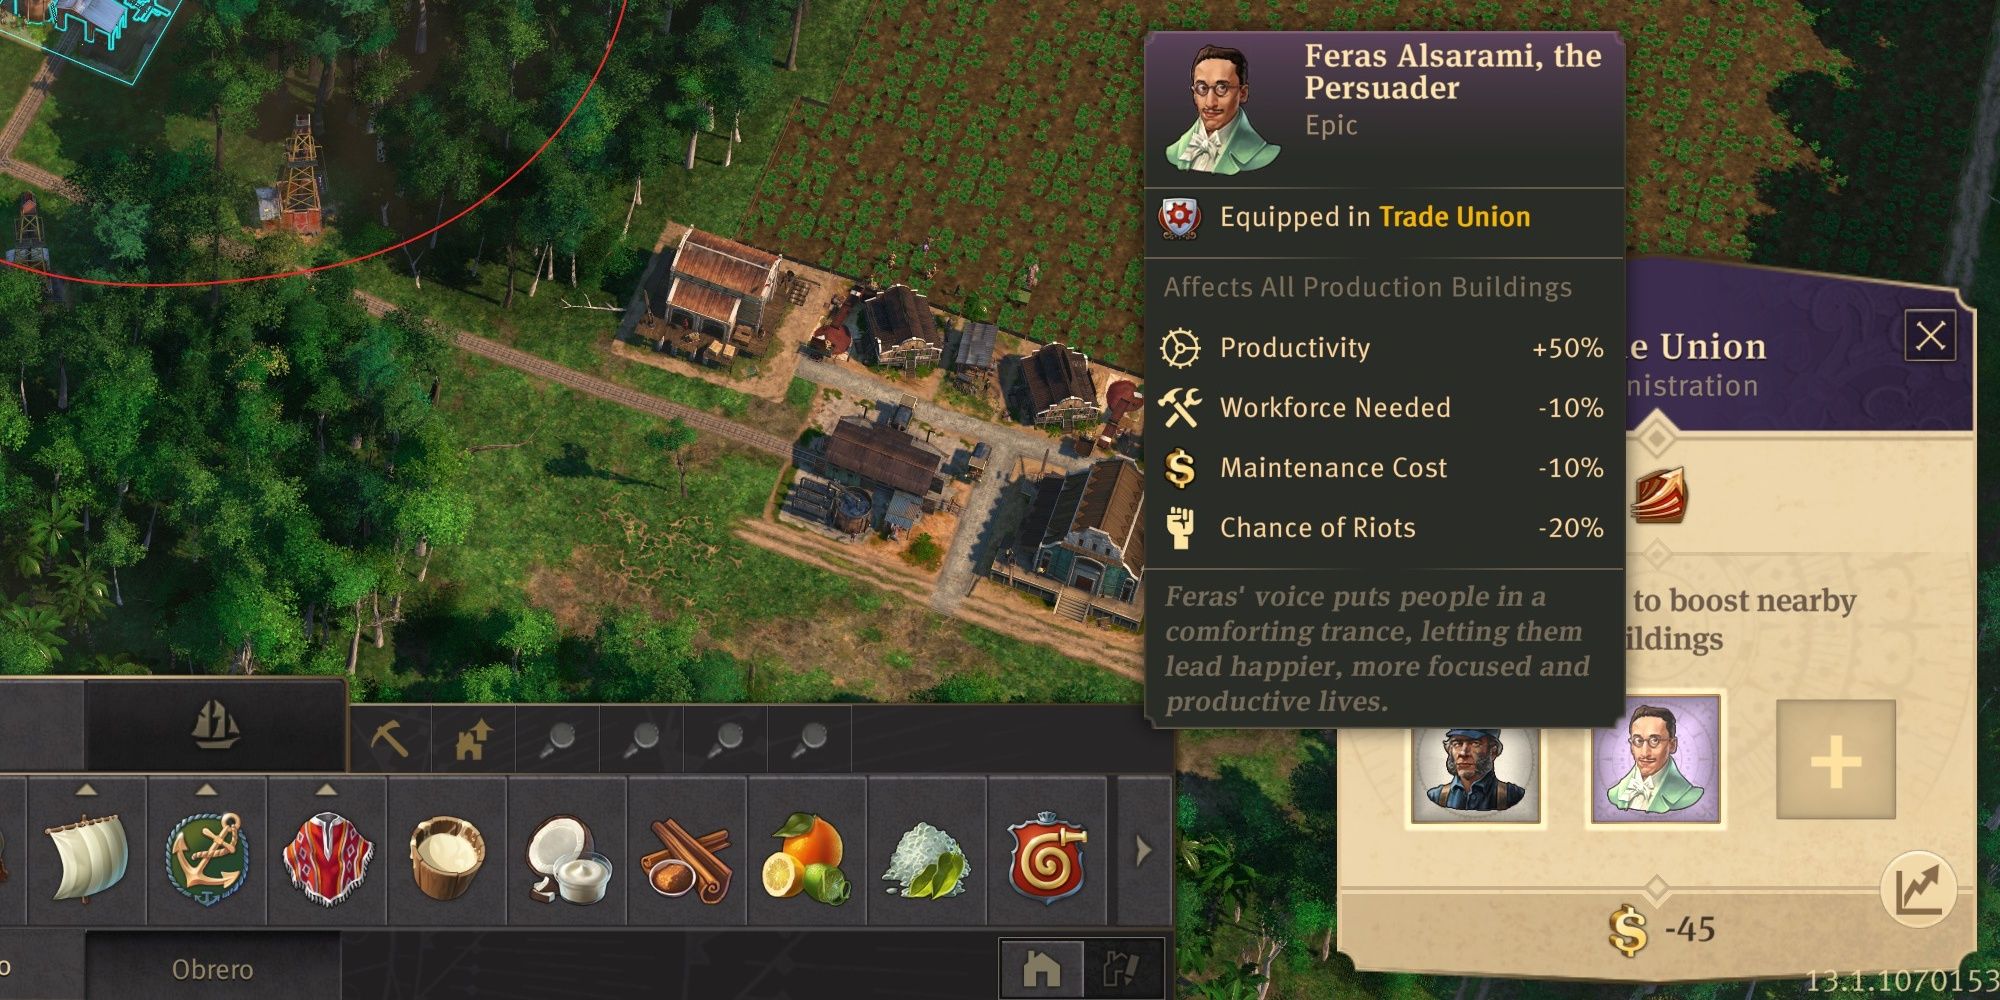 Anno 1800 screenshot showing the specialist Feras Alsarami equipped in a Trade Union